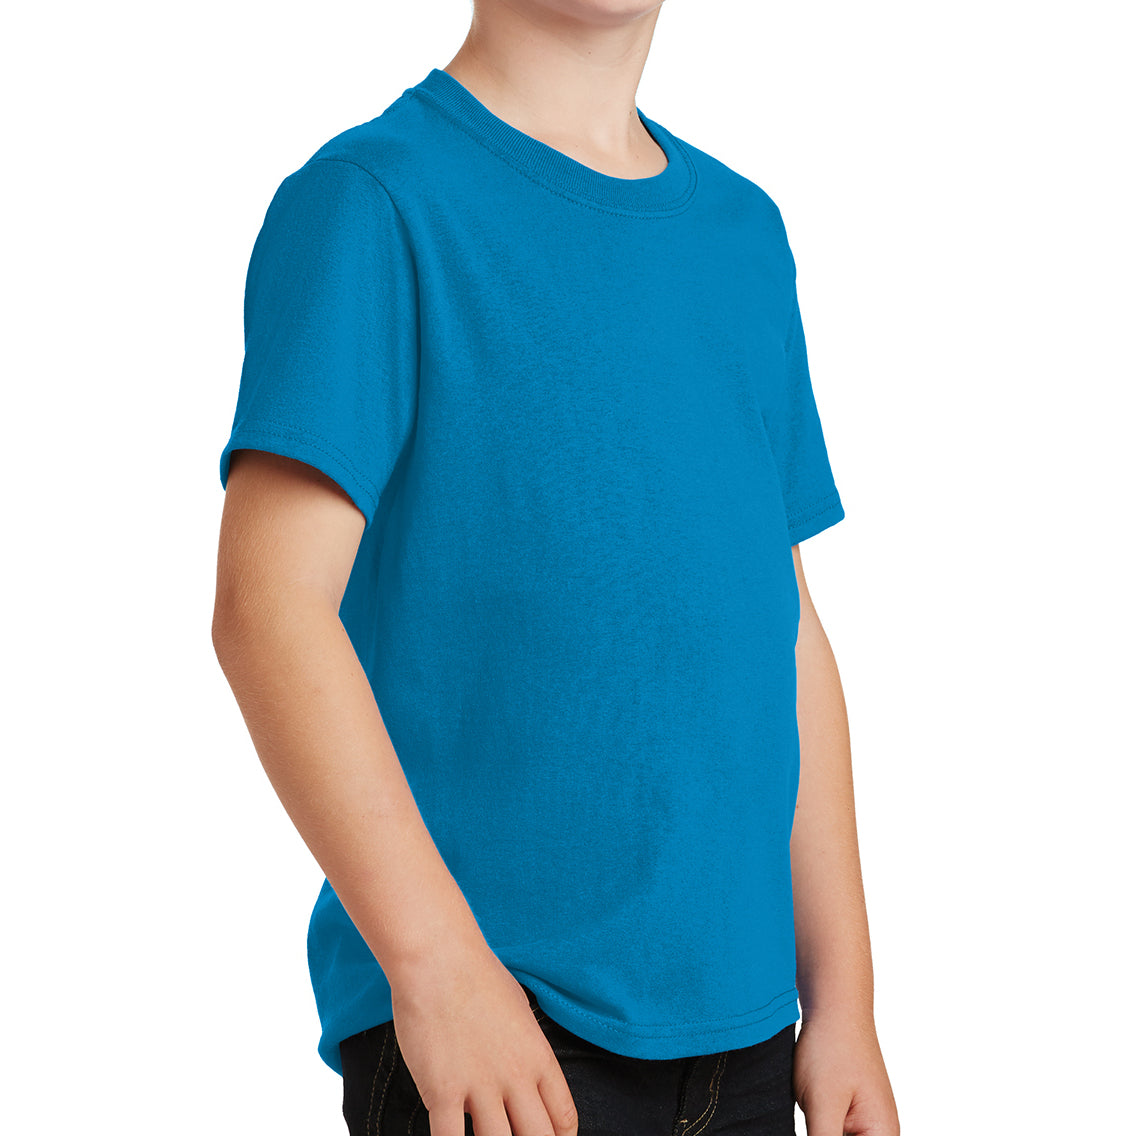 Youth Core Cotton Tee - Sapphire